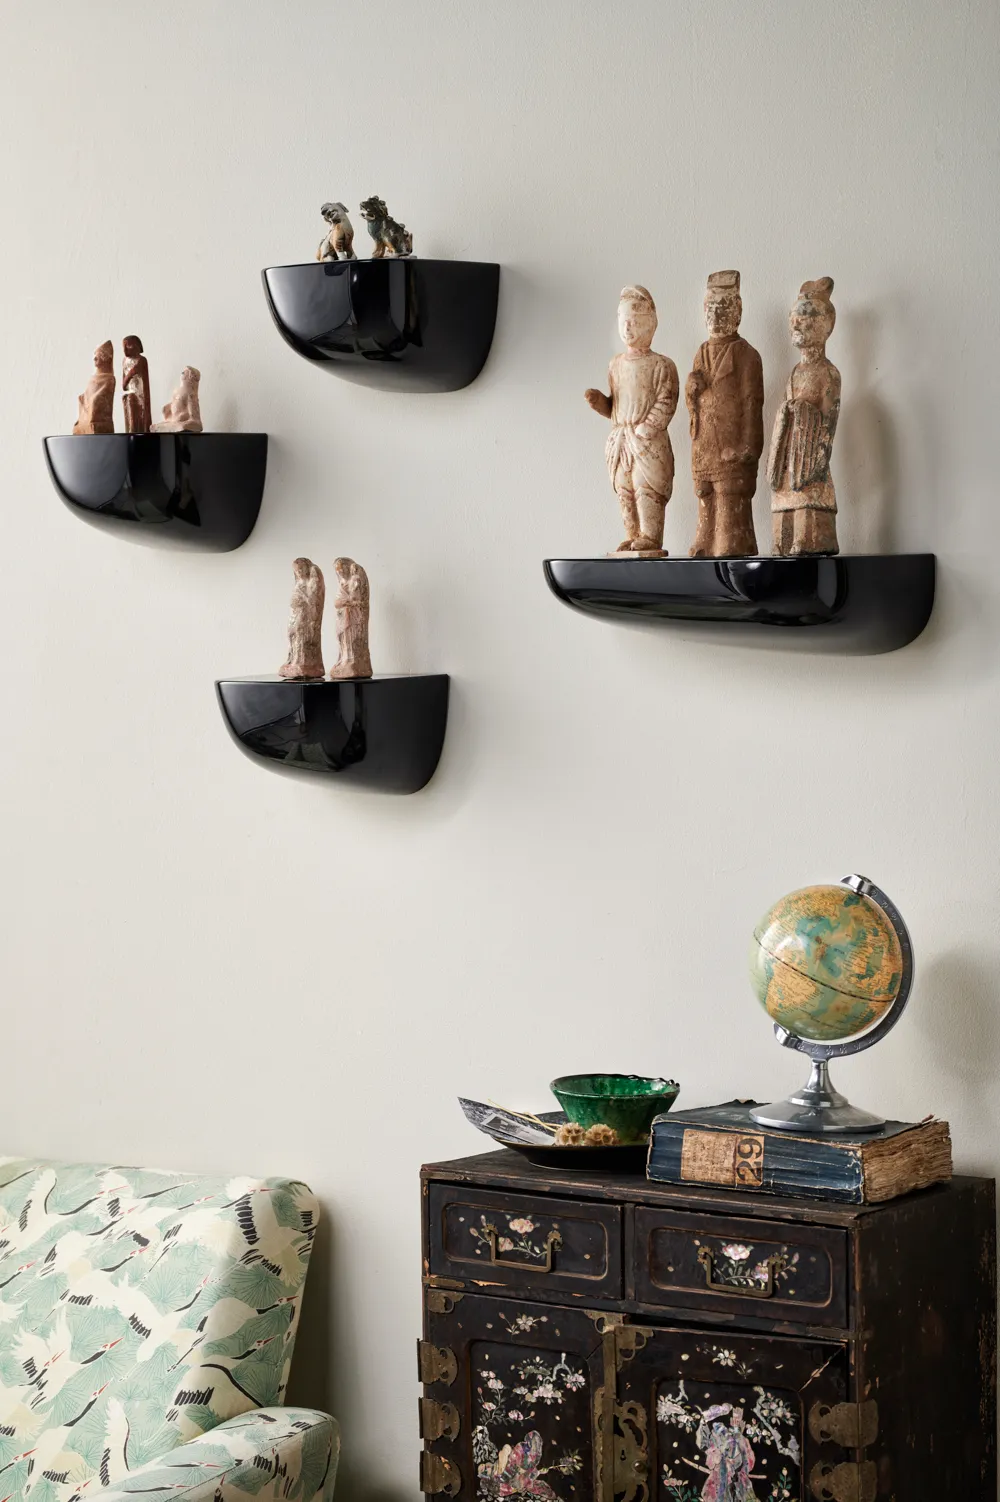 Ancient ornaments displayed on wall-mounted shelves. Modernist cornice shelves. Fragile ancient figures